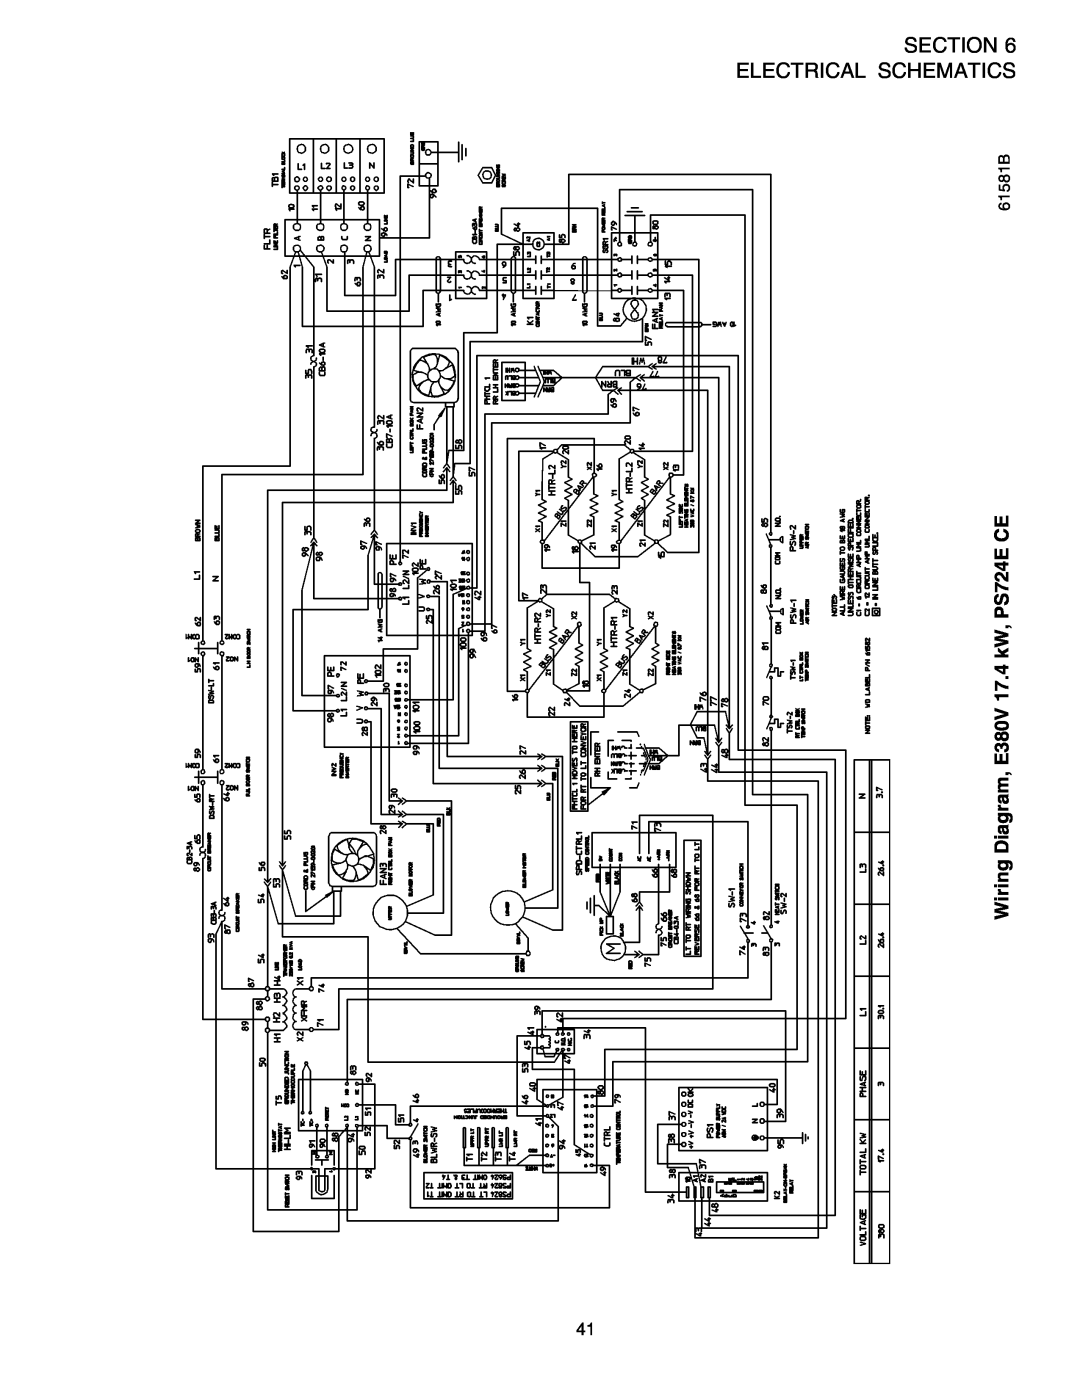 Middleby Marshall installation manual Section Electrical Schematics, Wiring Diagram, E380V 17.4 kW, PS724E CE, 61581B 